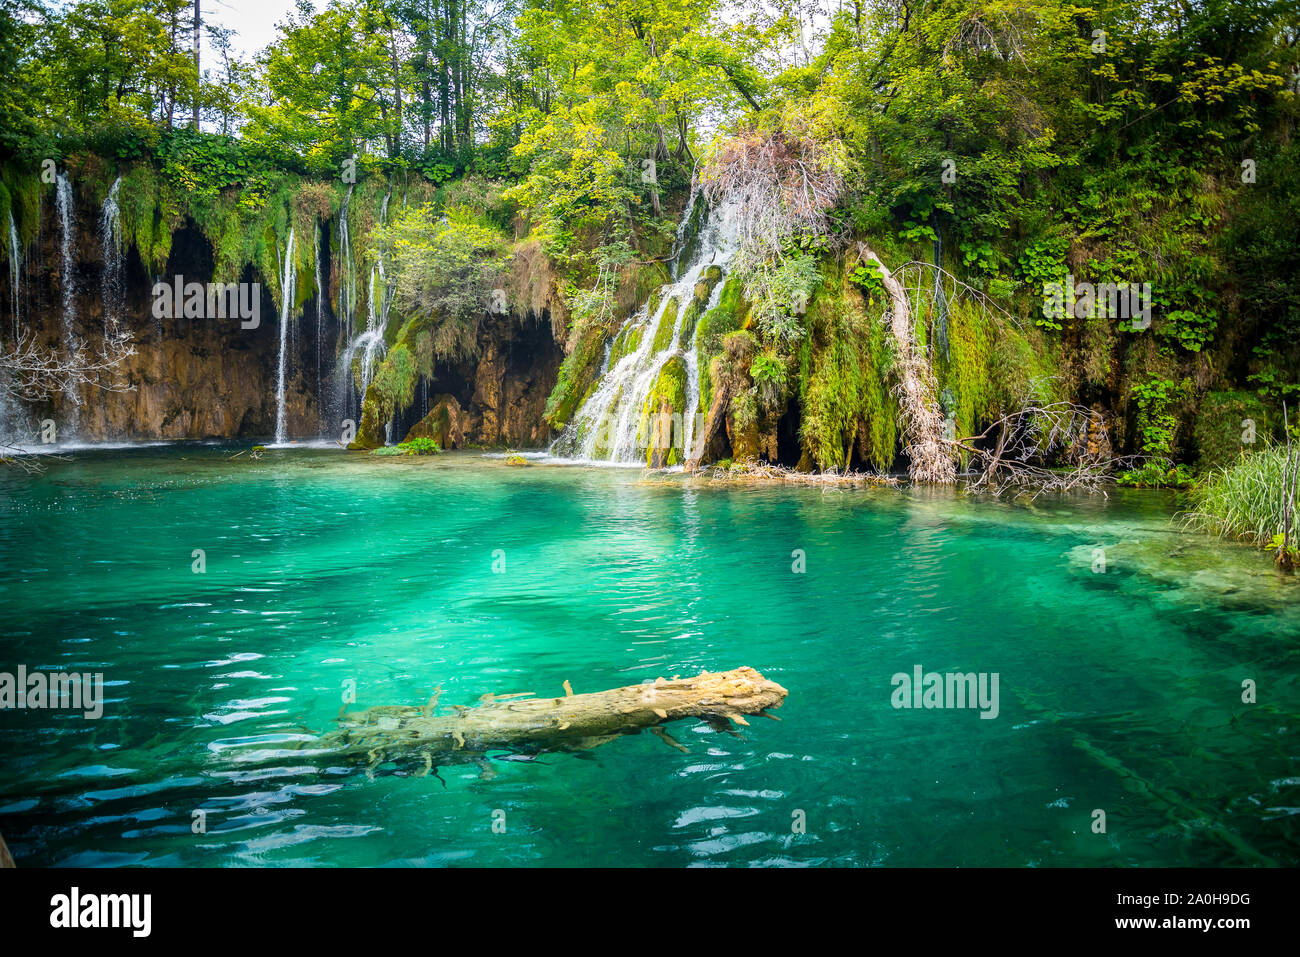 Amazing Waterfalls With Crystal Clear Water In The Forest In Plitvice